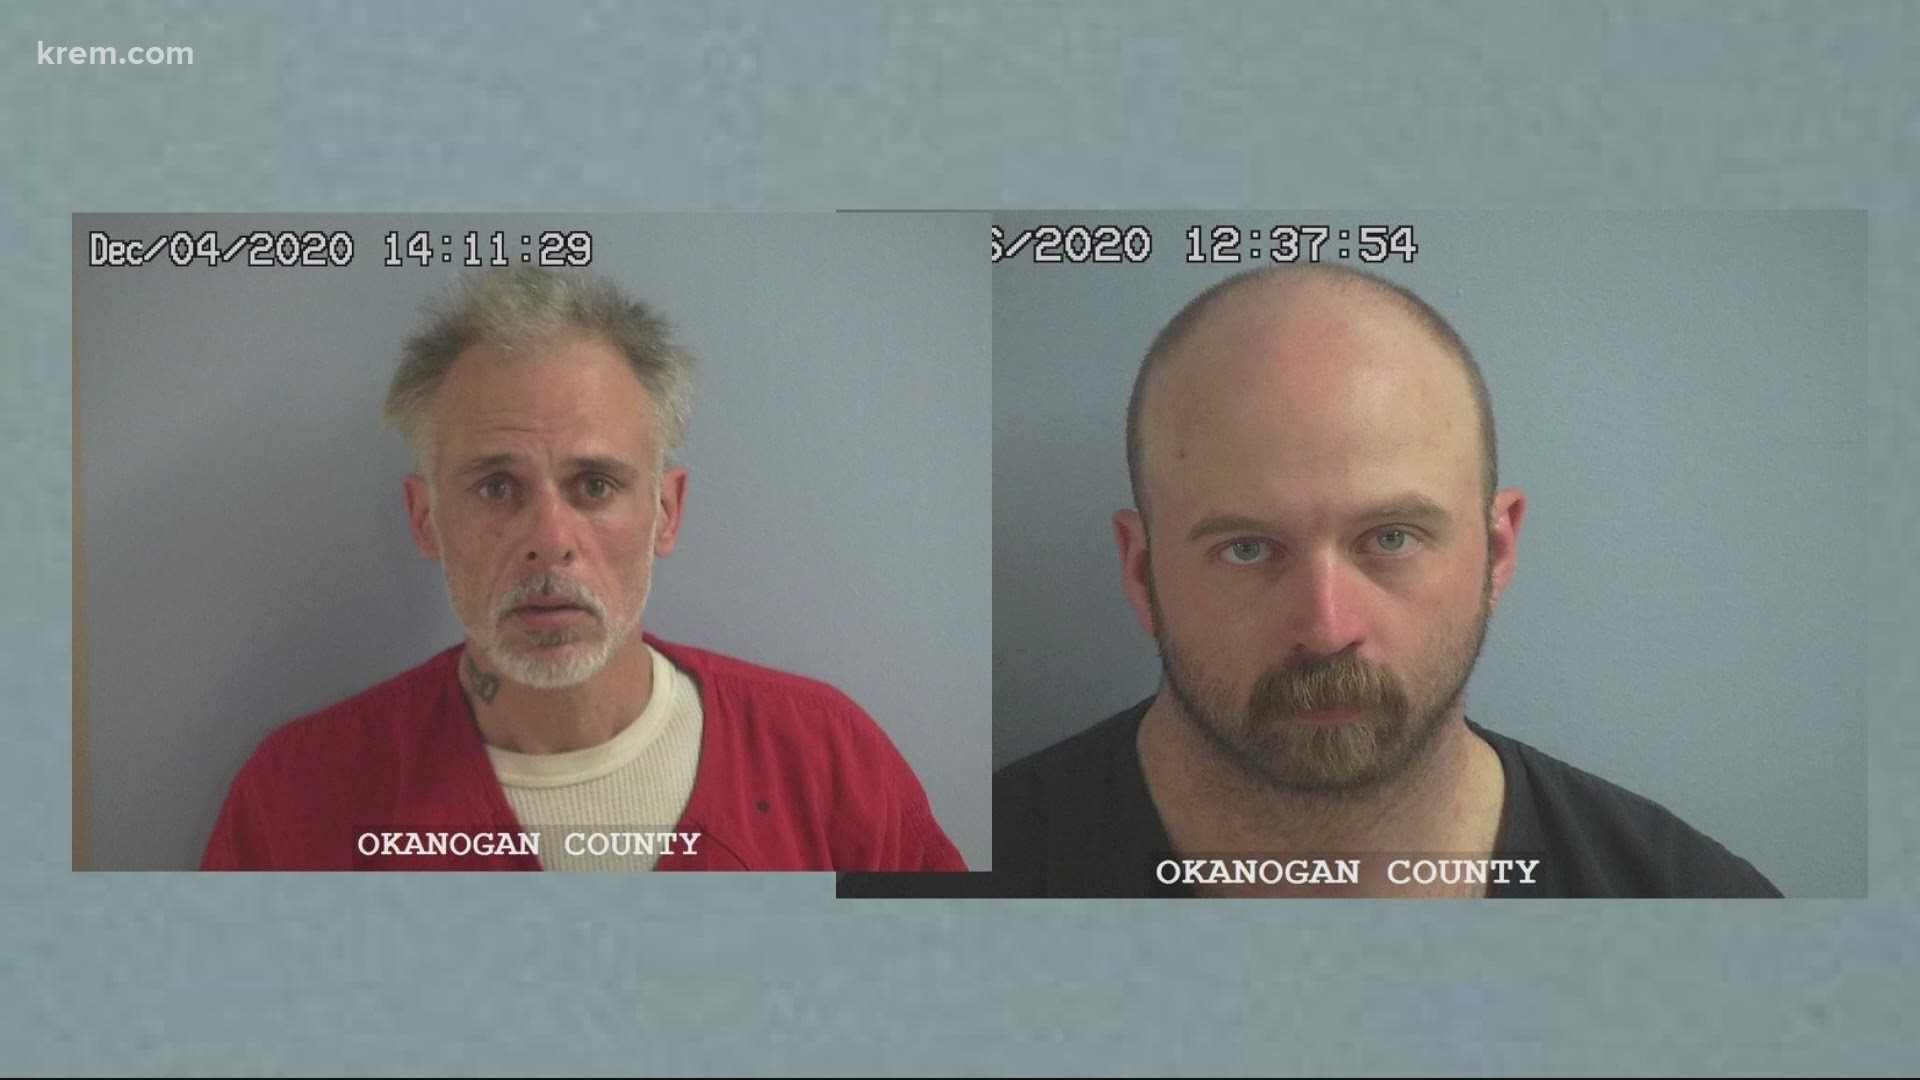 The Okanogan County Sheriff's office said they are currently investigating how the inmates escaped.